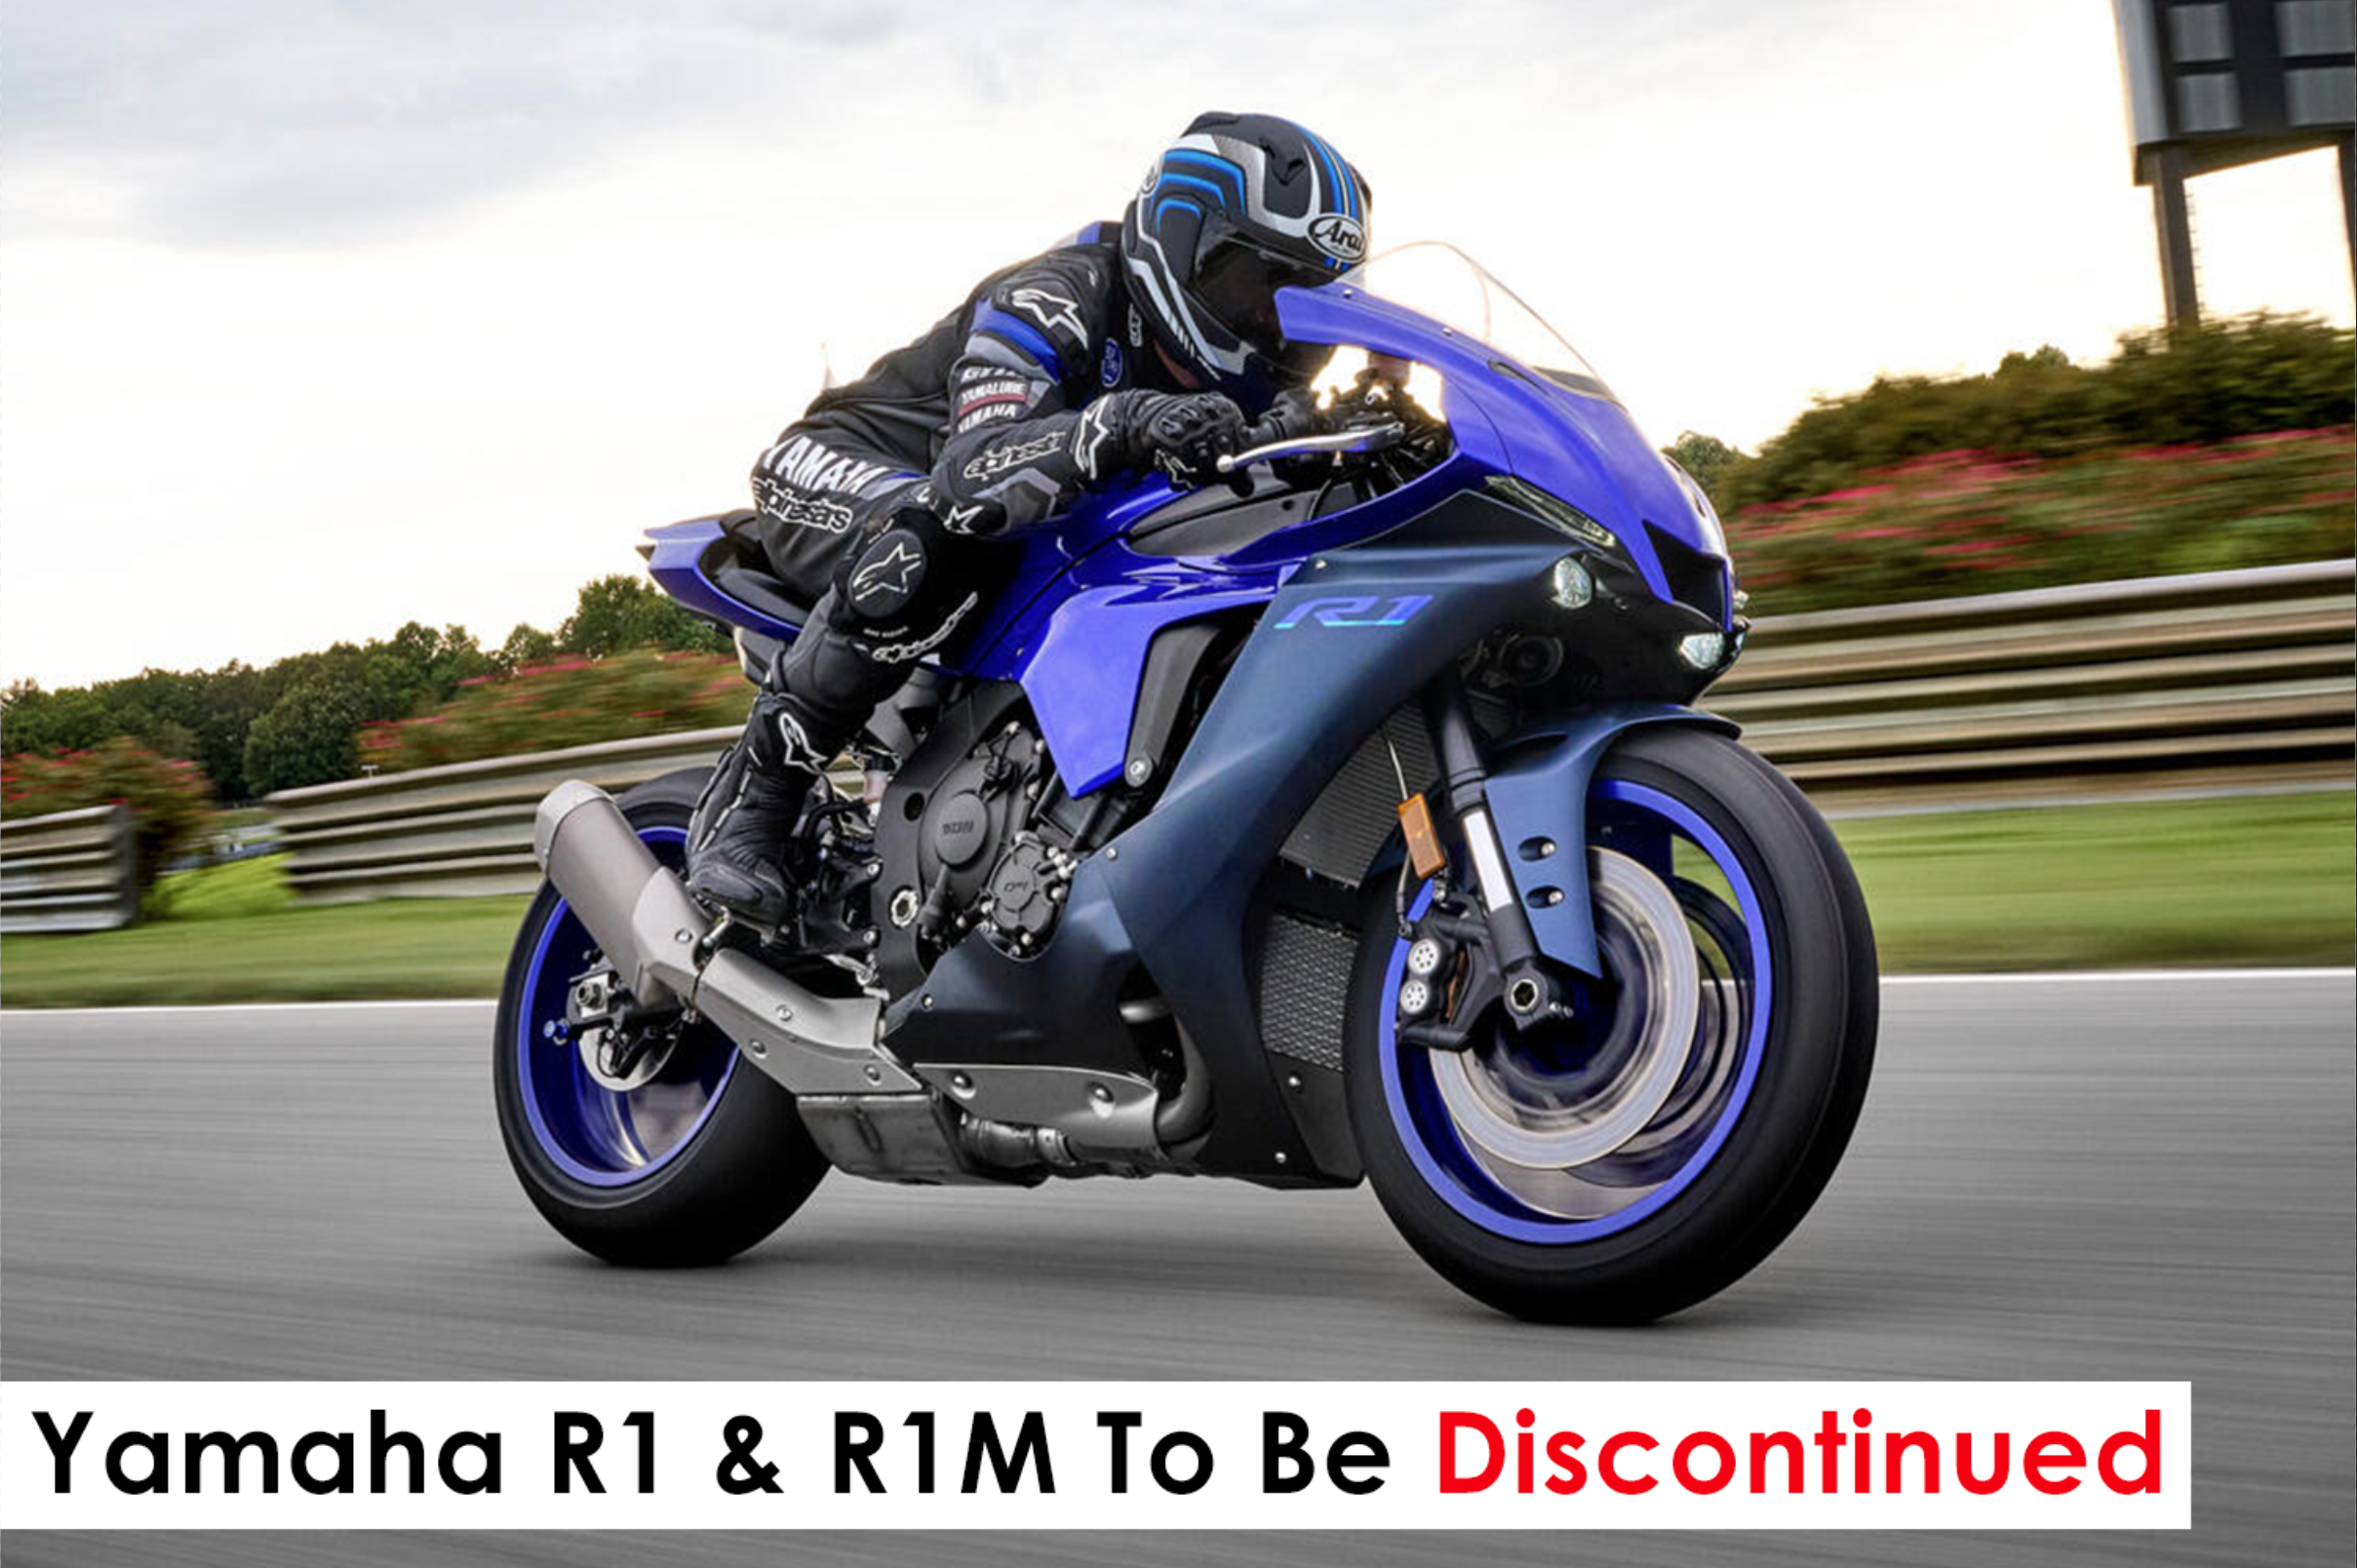 The End of an Era: Yamaha R1 and R1M To Be Discontinued